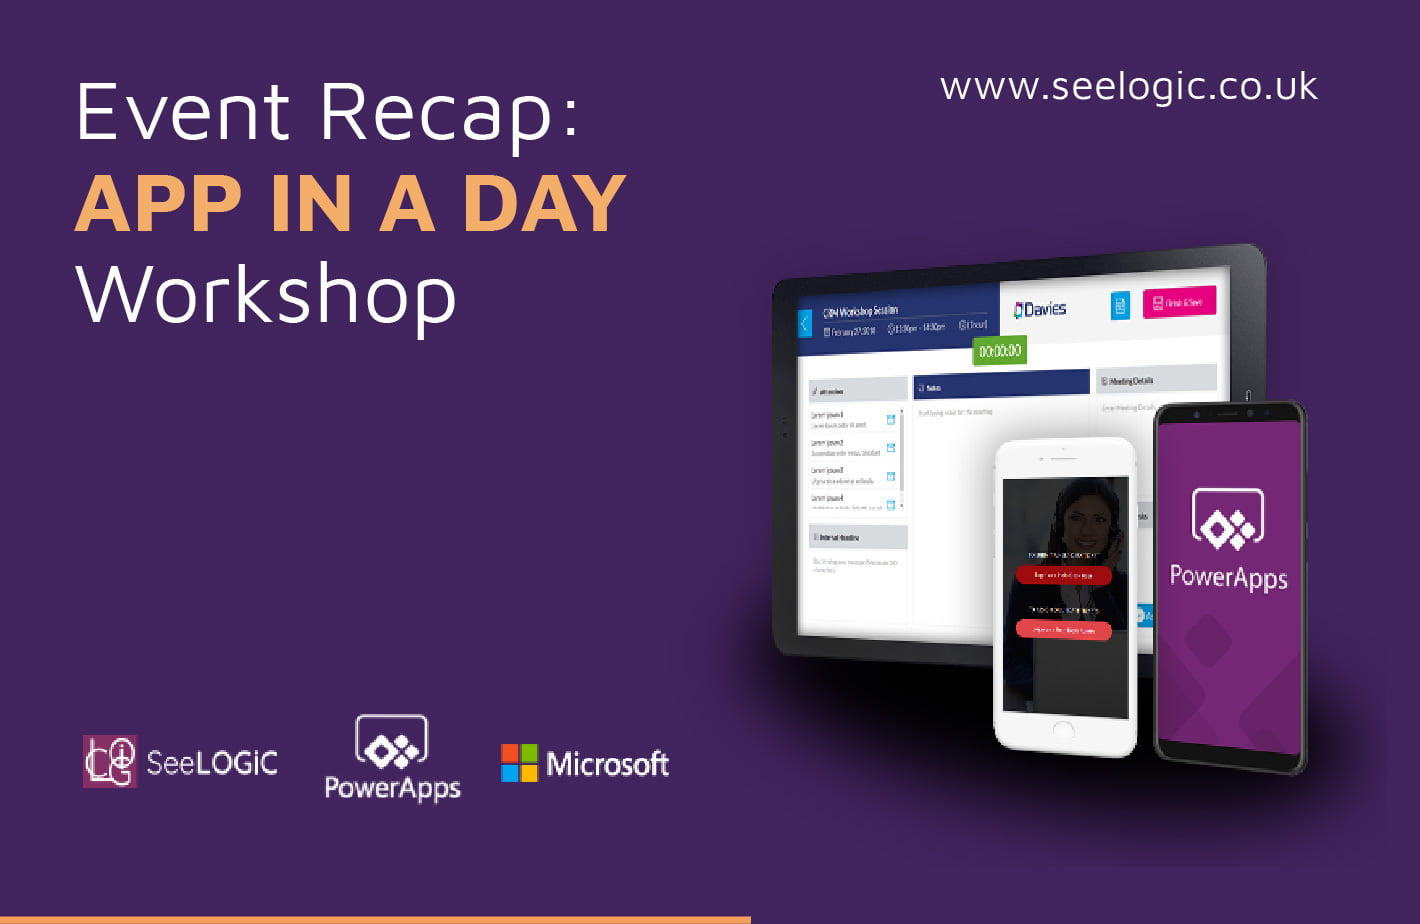 seelogic app in a day event